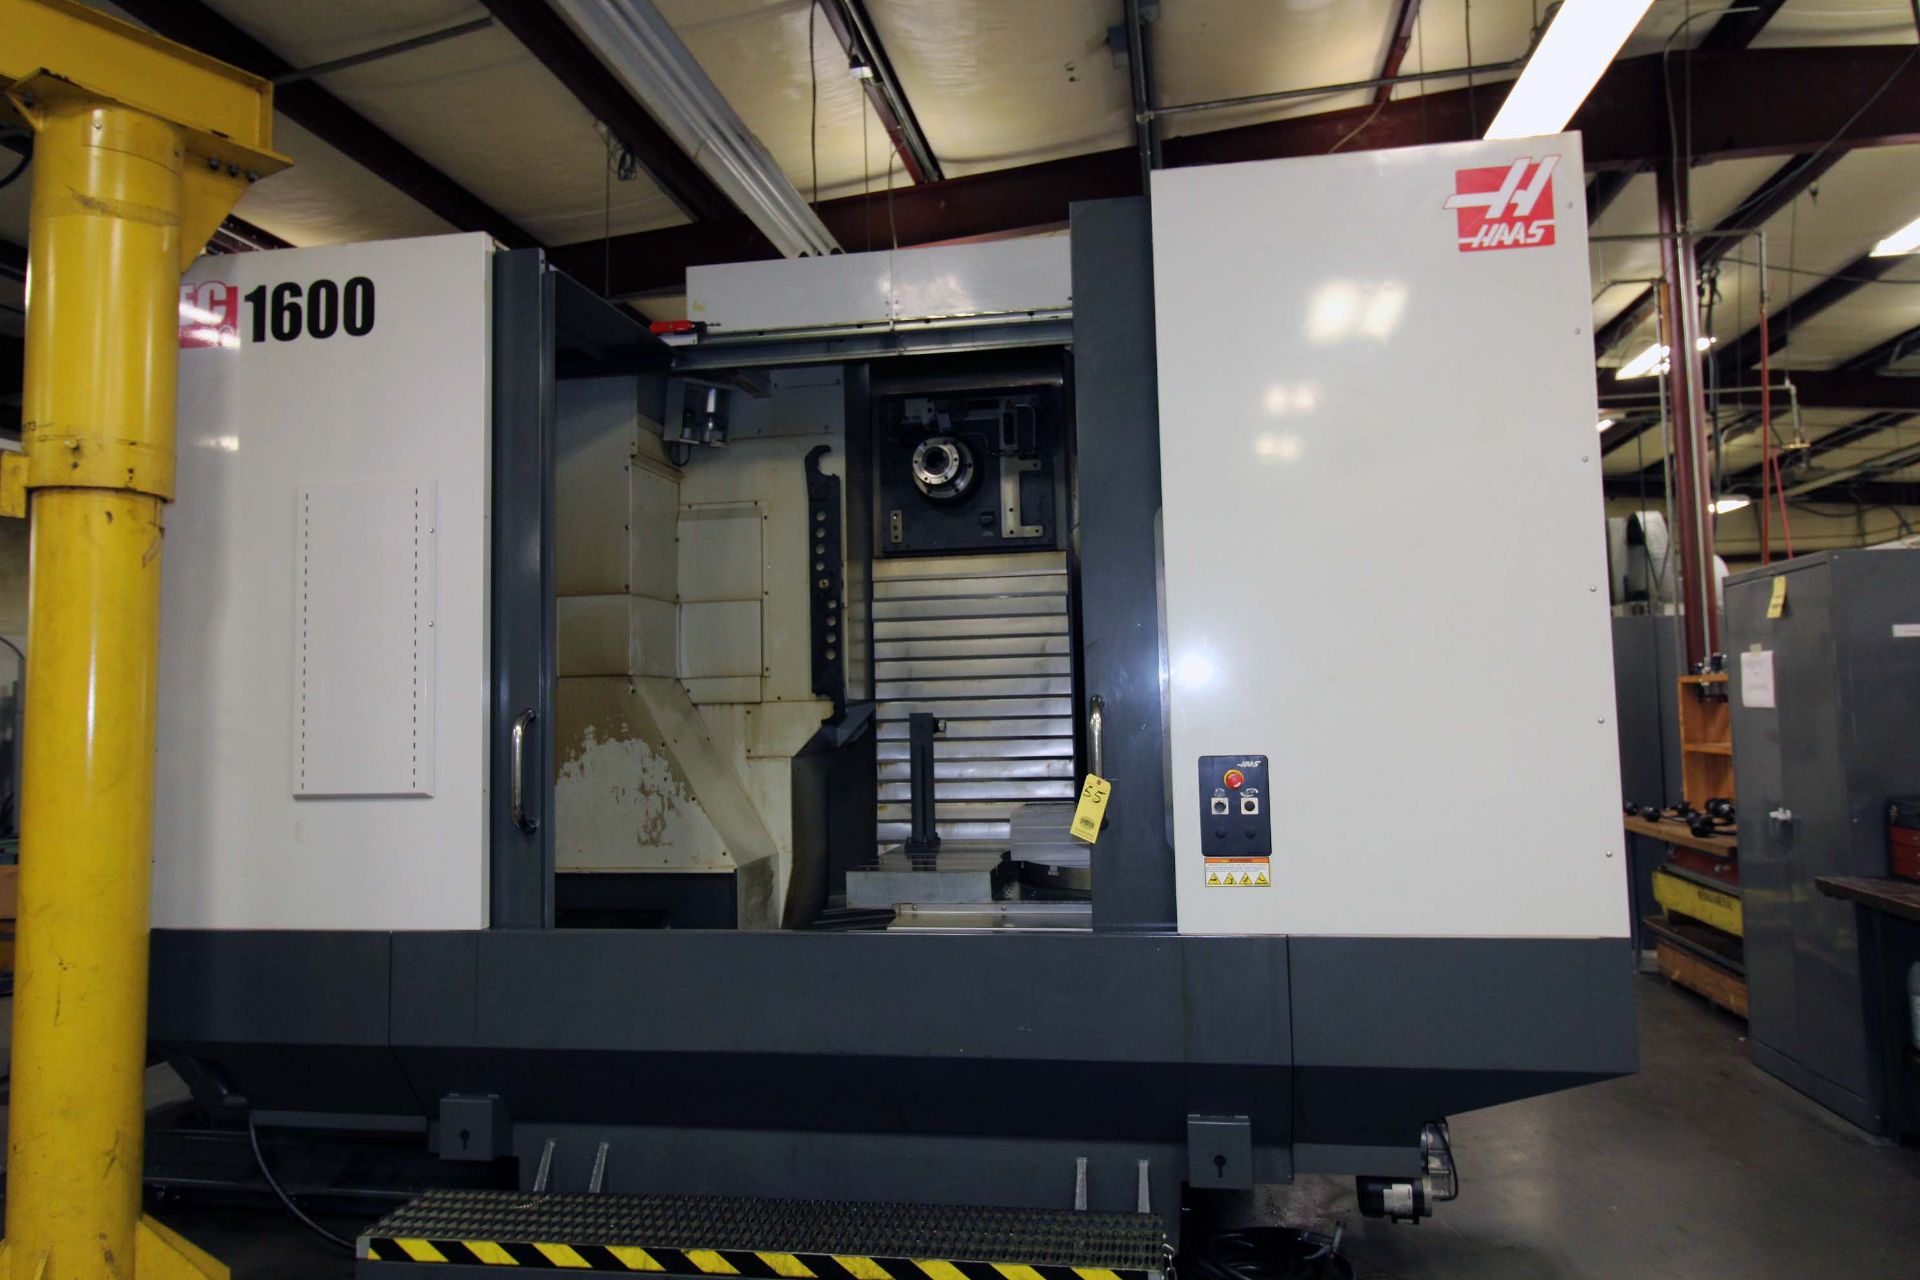 4-AXIS HORIZONTAL MACHINING CENTER, HAAS MDL. EC1600, new 10/2012, 64” x 36” table, 30” built-in